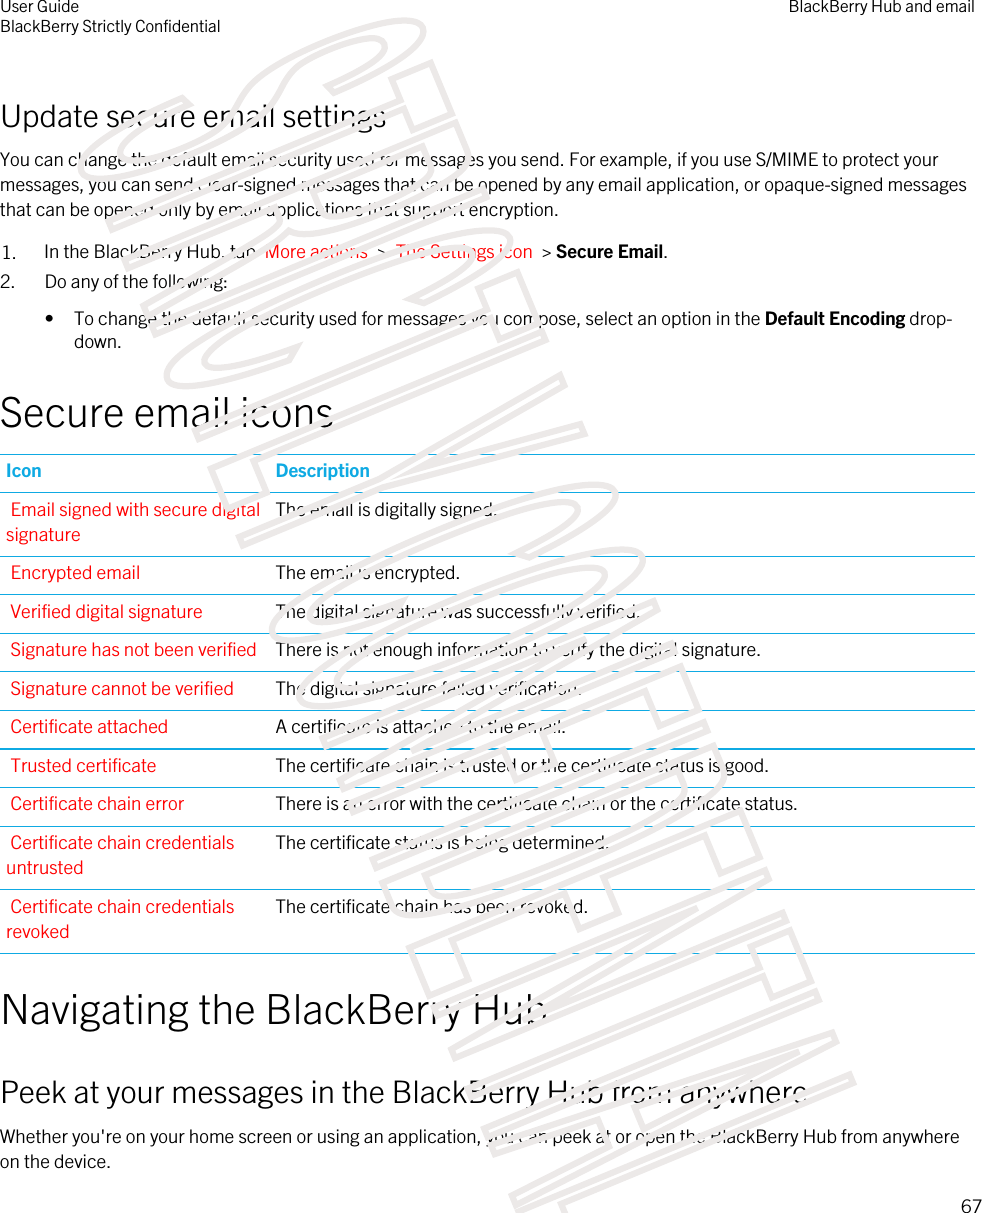 Update secure email settingsYou can change the default email security used for messages you send. For example, if you use S/MIME to protect your messages, you can send clear-signed messages that can be opened by any email application, or opaque-signed messages that can be opened only by email applications that support encryption.1. In the BlackBerry Hub, tap  More actions  &gt;  The Settings icon  &gt; Secure Email.2. Do any of the following:• To change the default security used for messages you compose, select an option in the Default Encoding drop-down.Secure email iconsIcon DescriptionEmail signed with secure digital signatureThe email is digitally signed.Encrypted email The email is encrypted.Verified digital signature The digital signature was successfully verified.Signature has not been verified There is not enough information to verify the digital signature.Signature cannot be verified The digital signature failed verification.Certificate attached A certificate is attached to the email.Trusted certificate The certificate chain is trusted or the certificate status is good.Certificate chain error There is an error with the certificate chain or the certificate status.Certificate chain credentials untrustedThe certificate status is being determined.Certificate chain credentials revokedThe certificate chain has been revoked.Navigating the BlackBerry HubPeek at your messages in the BlackBerry Hub from anywhereWhether you&apos;re on your home screen or using an application, you can peek at or open the BlackBerry Hub from anywhere on the device.User GuideBlackBerry Strictly ConfidentialBlackBerry Hub and email67STRICTLY CONFIDENTIAL